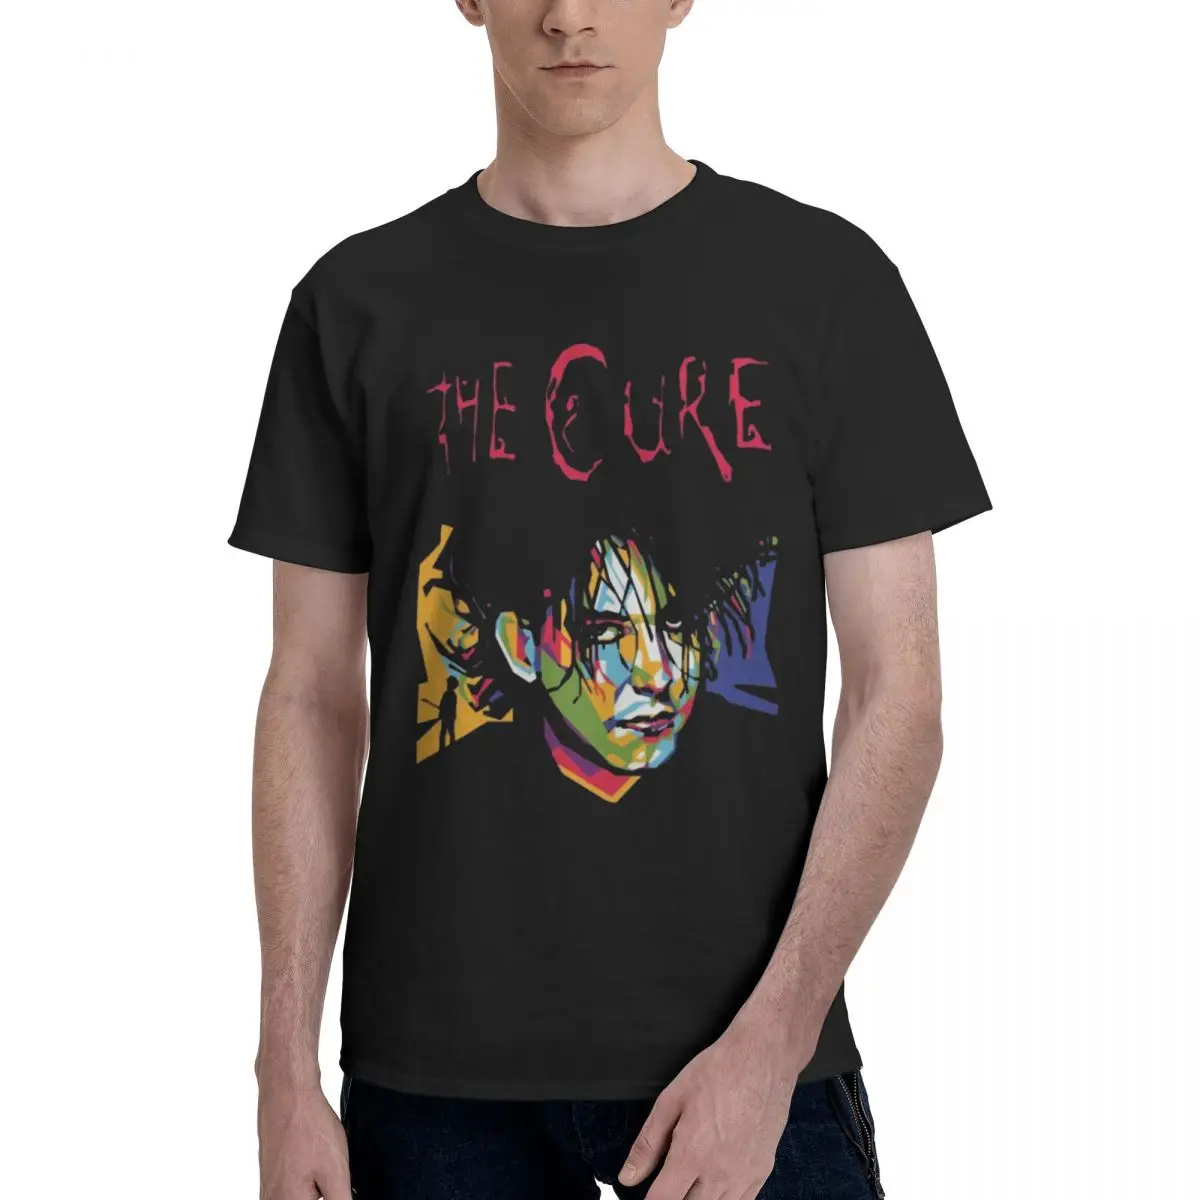 

The Cure Robert Smith 13 Tshirt Activity competition Hot Sale Humor Graphic Adult T-shirt Crewneck Top quality USA Size